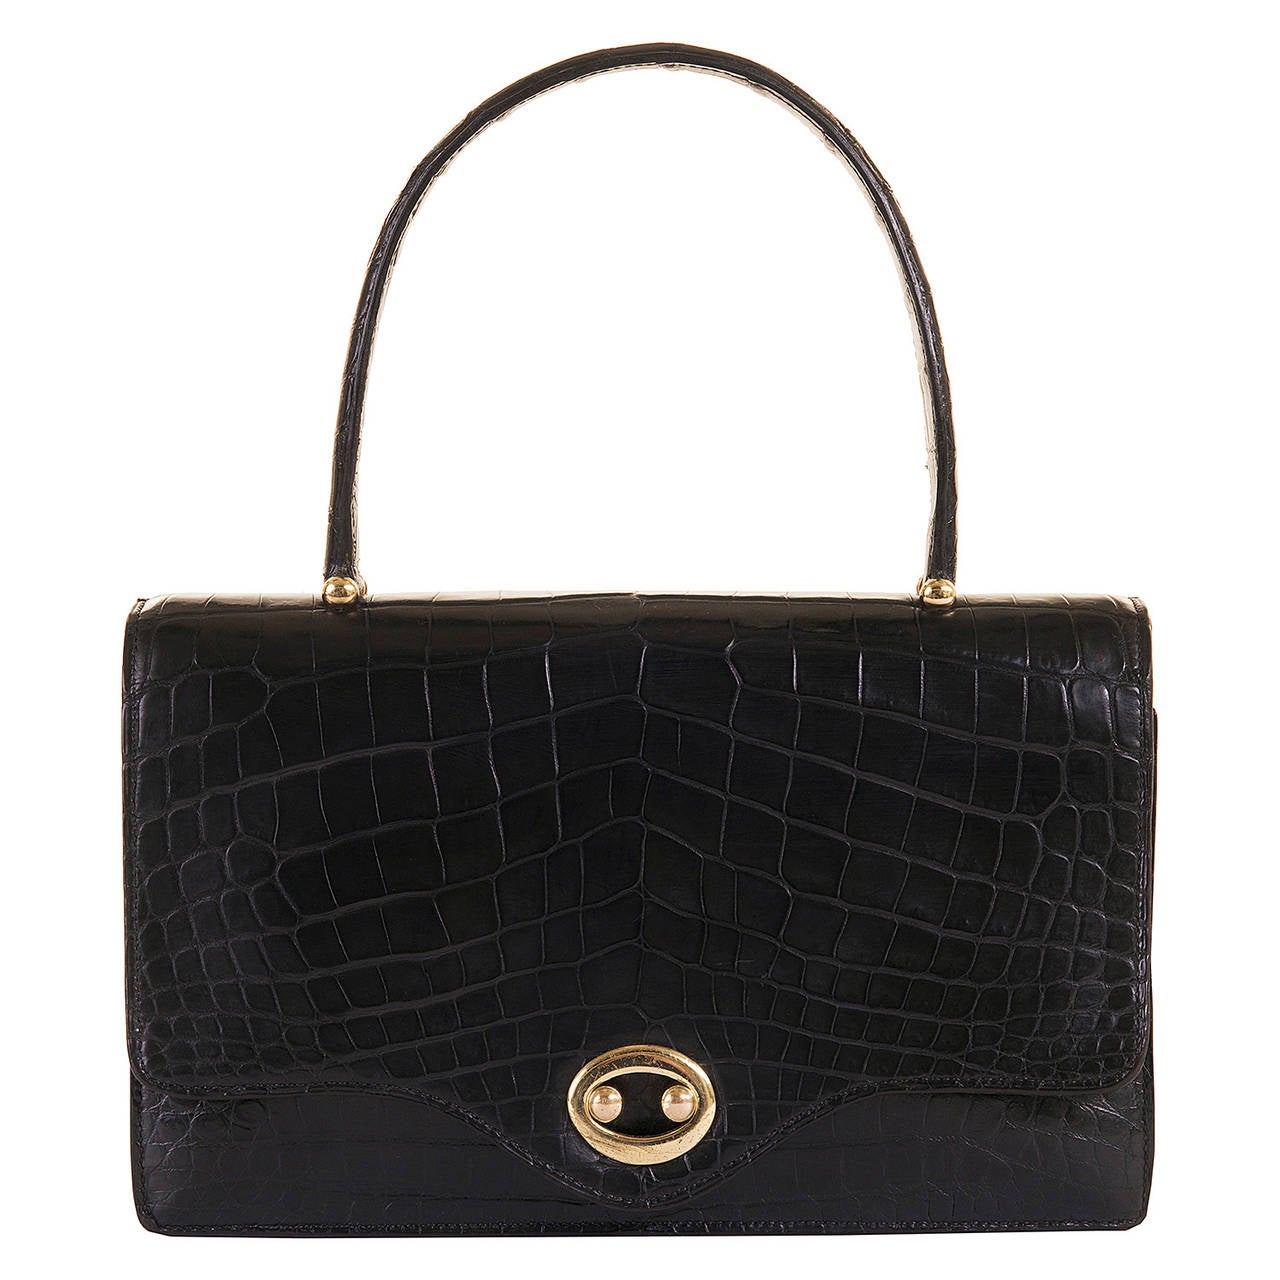 A very Rare & Elegant Hermes 'Sac Boutonniere' Black Crocodile Handbag. Complemented with Gold-tone hardware, the Handbag was made in circa 1970 and is in excellent, much-loved condition, inside and out, with the inside finished in matching Black